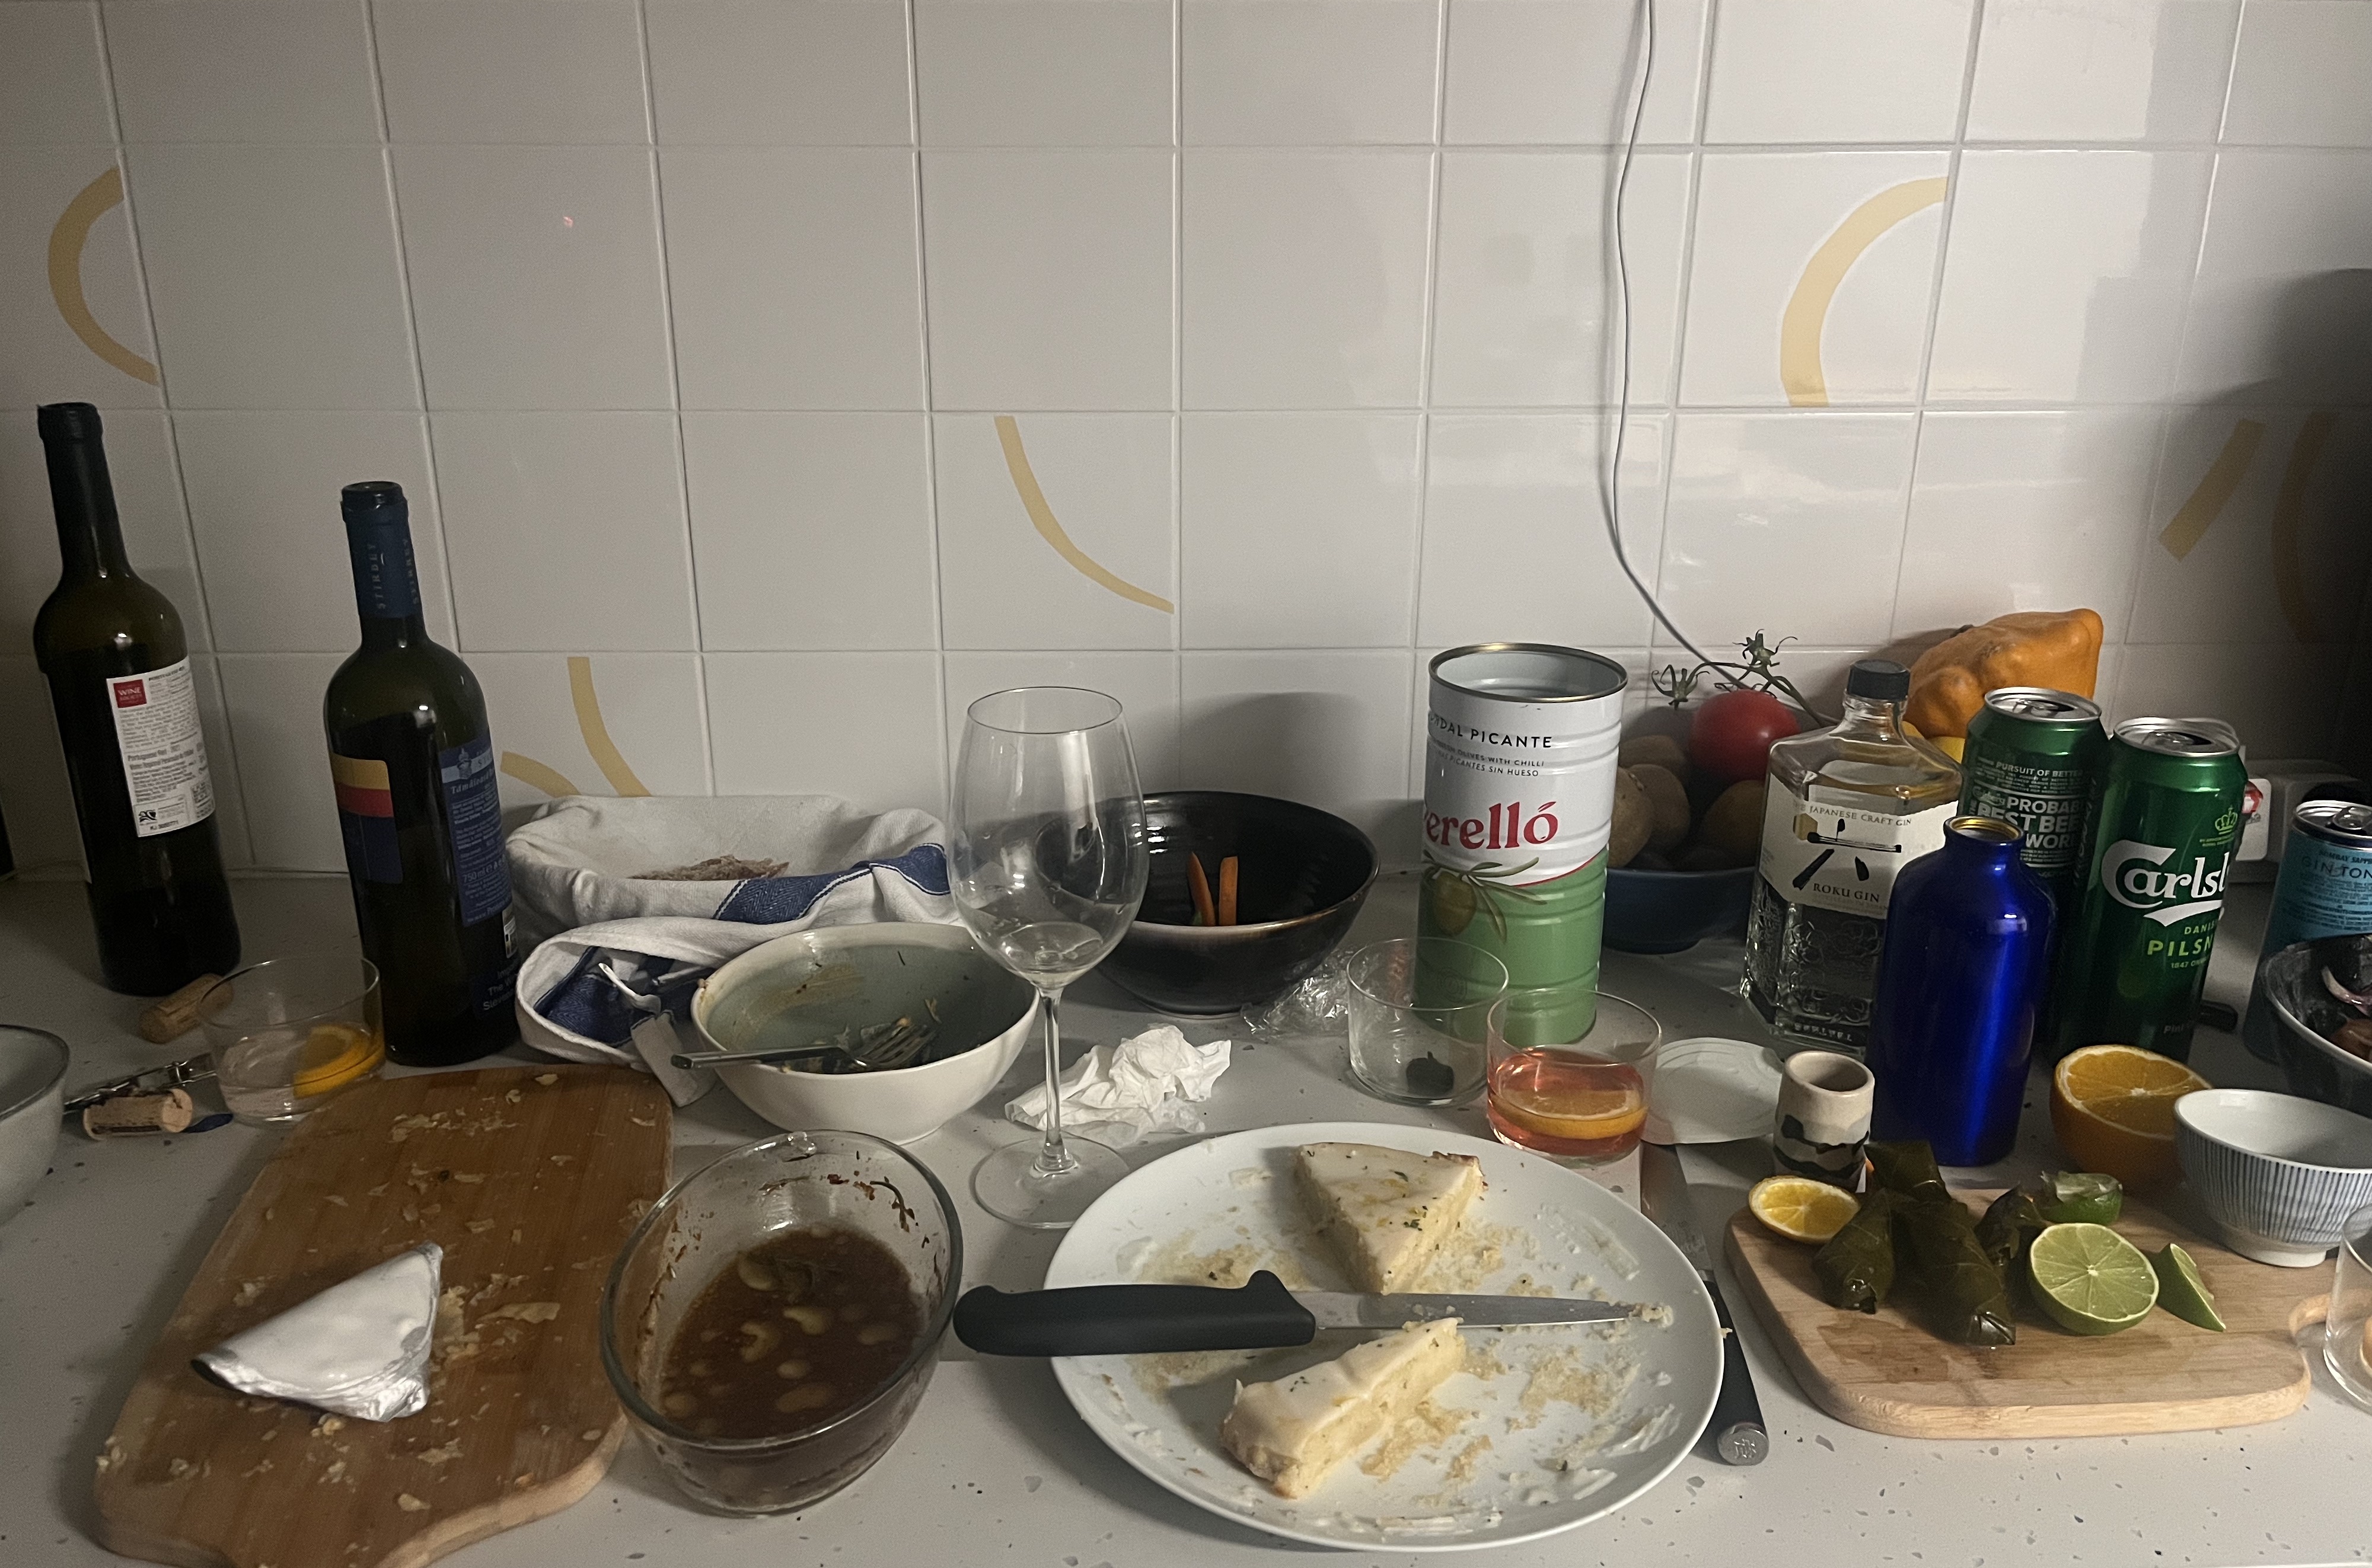 A picture of a kitchen counter covered in party detritus: dirty dishes, 2 empty wine bottles, lager tins, a bottle of Roku gin, a plate with a sliver of cake on it, and a big empty tin of Perello olives